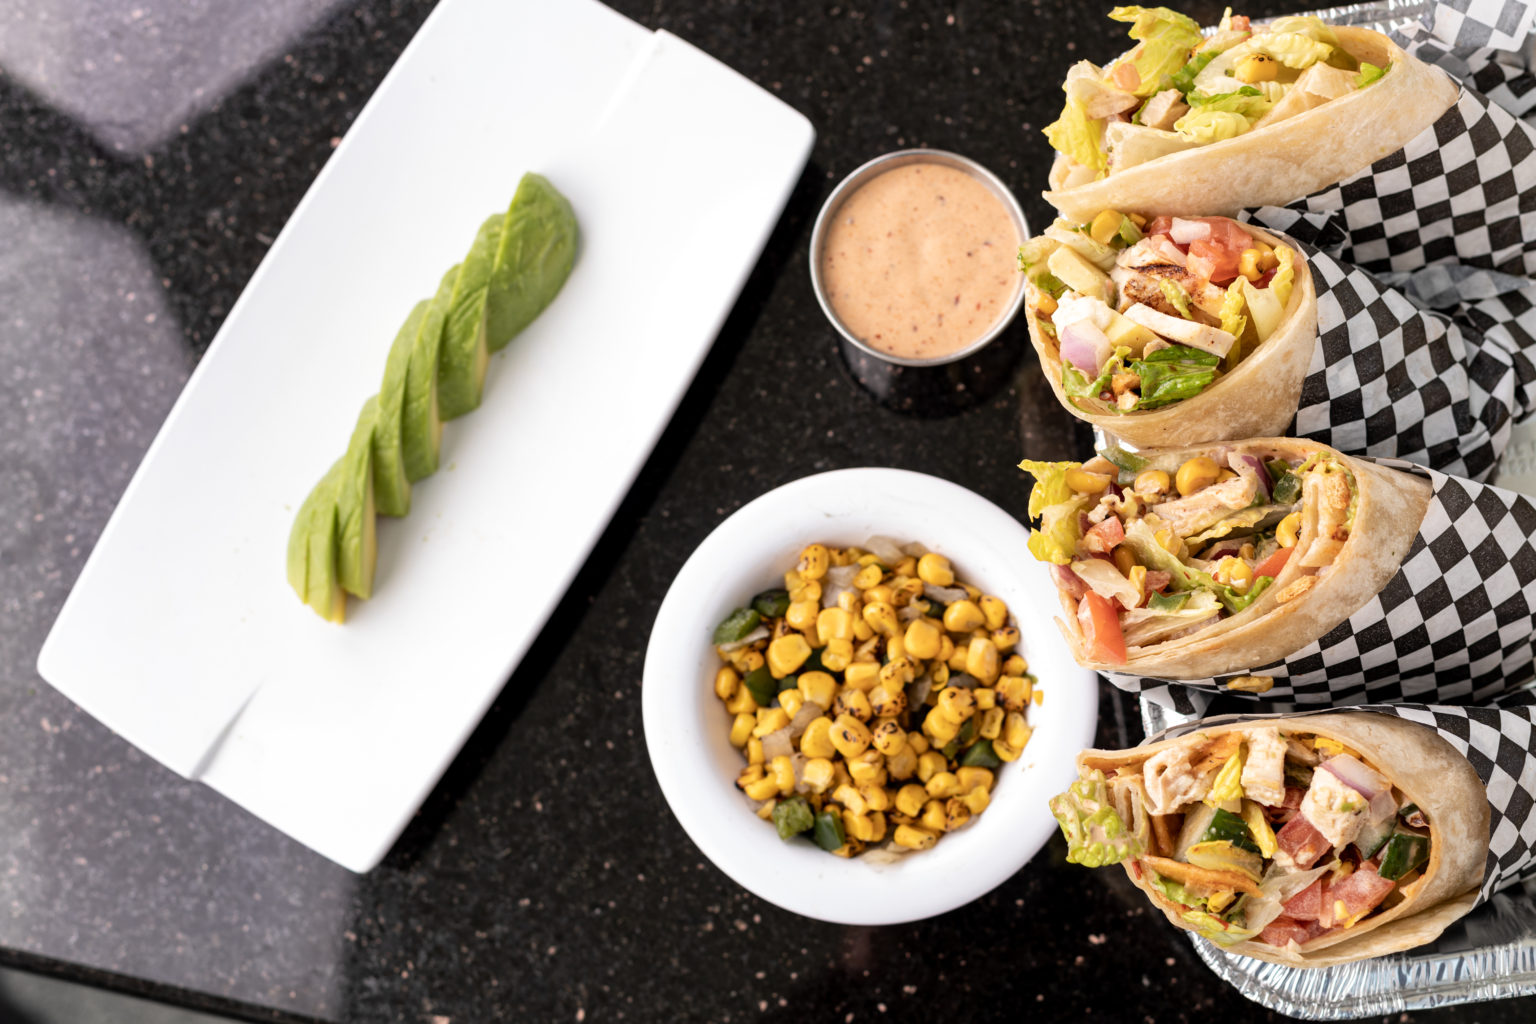 Southwest chicken wraps with avocado, corn and dipping sauce